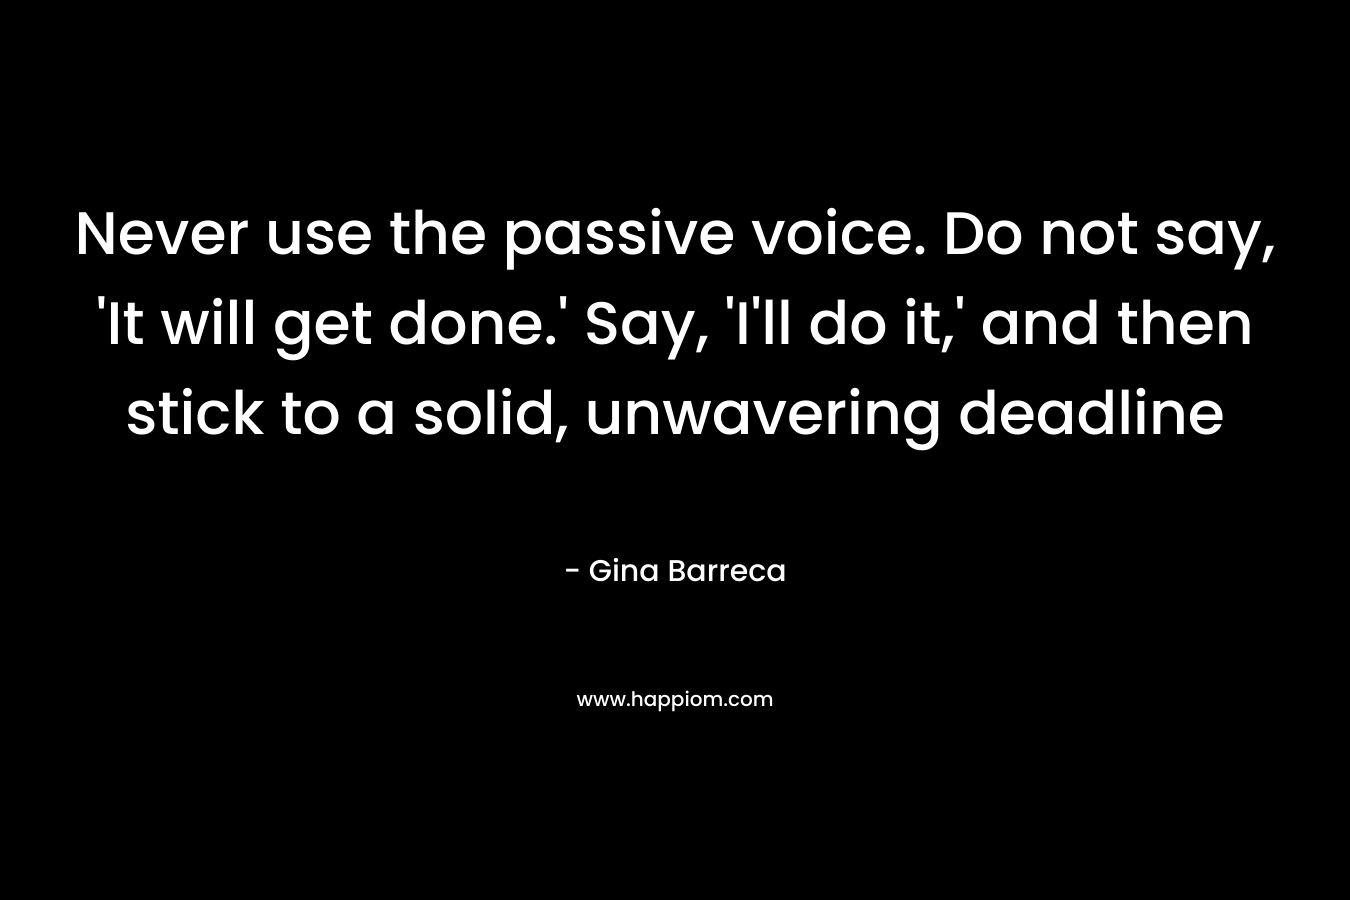 Never use the passive voice. Do not say, 'It will get done.' Say, 'I'll do it,' and then stick to a solid, unwavering deadline